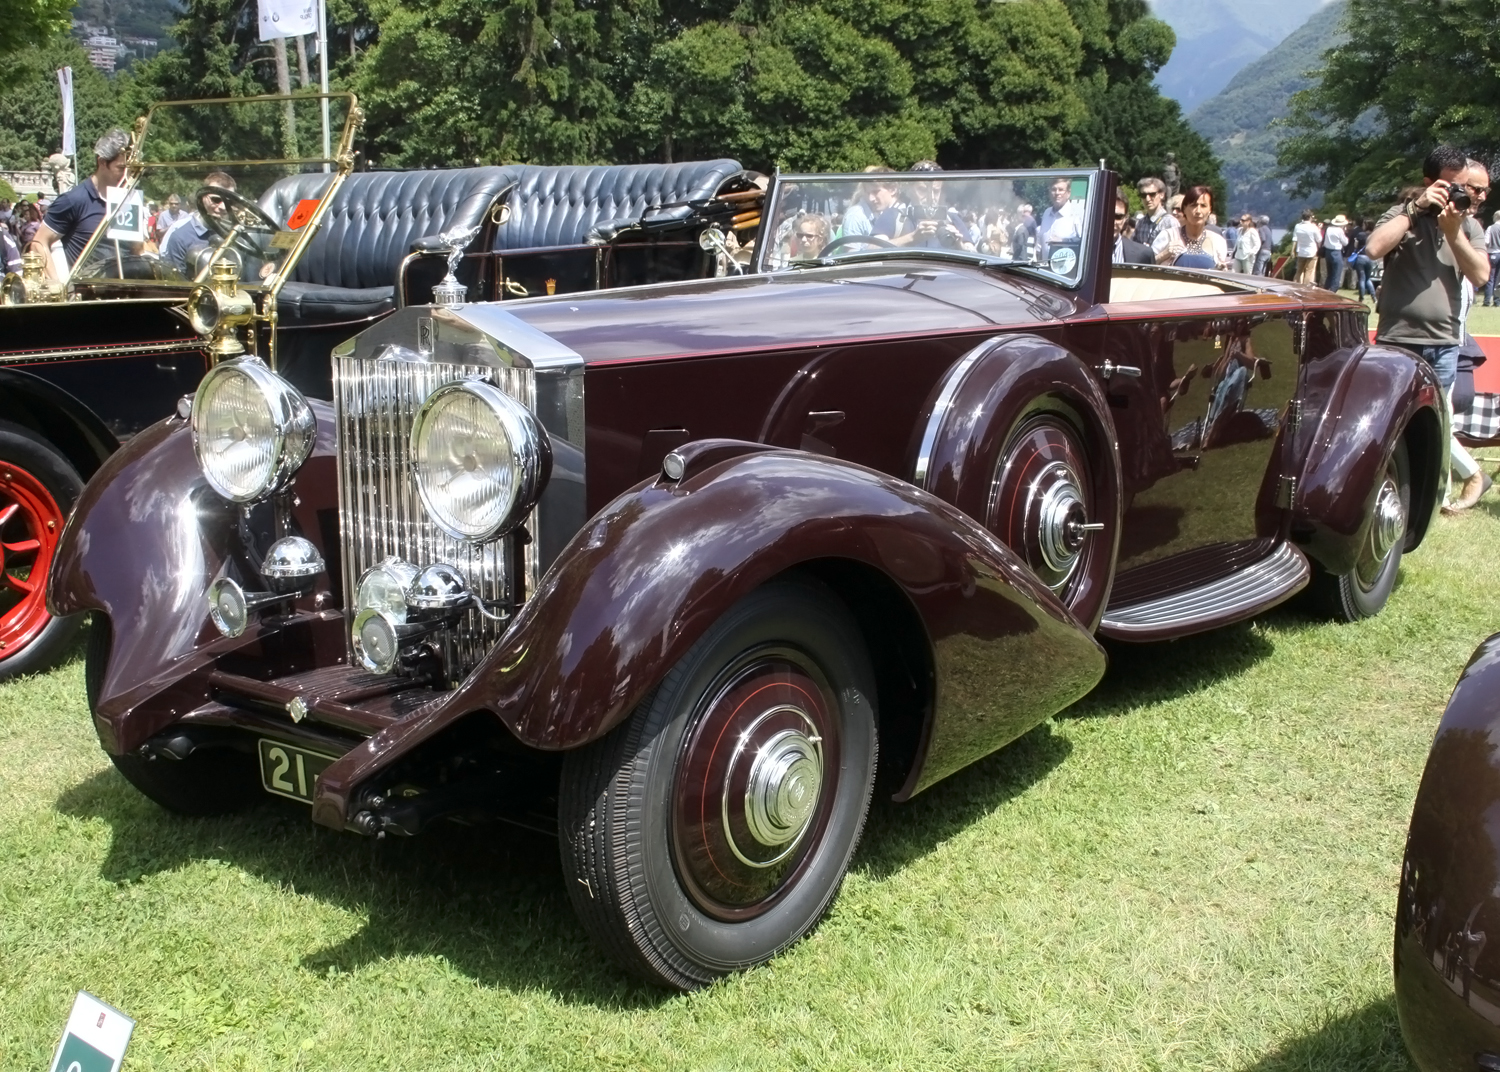 an old style car on display on some grass